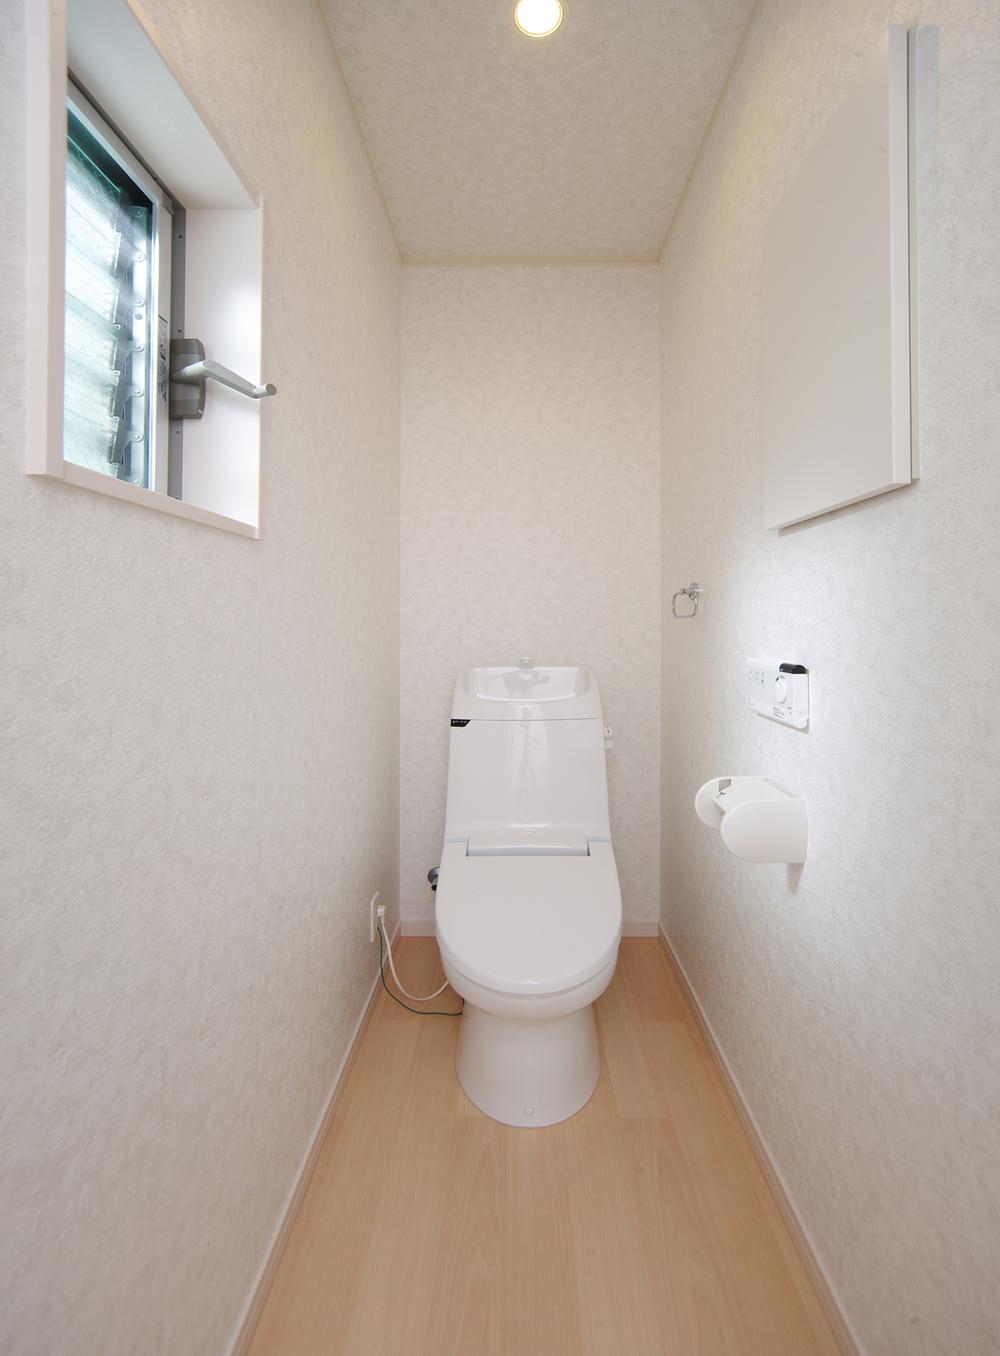 Other Equipment. Toilet shower toilet integrated of TOTO. Toilet bowl is strongly scratch dirt and bacteria, Remove the dirt with a strong detergency. Because the shape that can ensure a good dry waterways of drainage, Clean and pleasantly spend unlikely every day